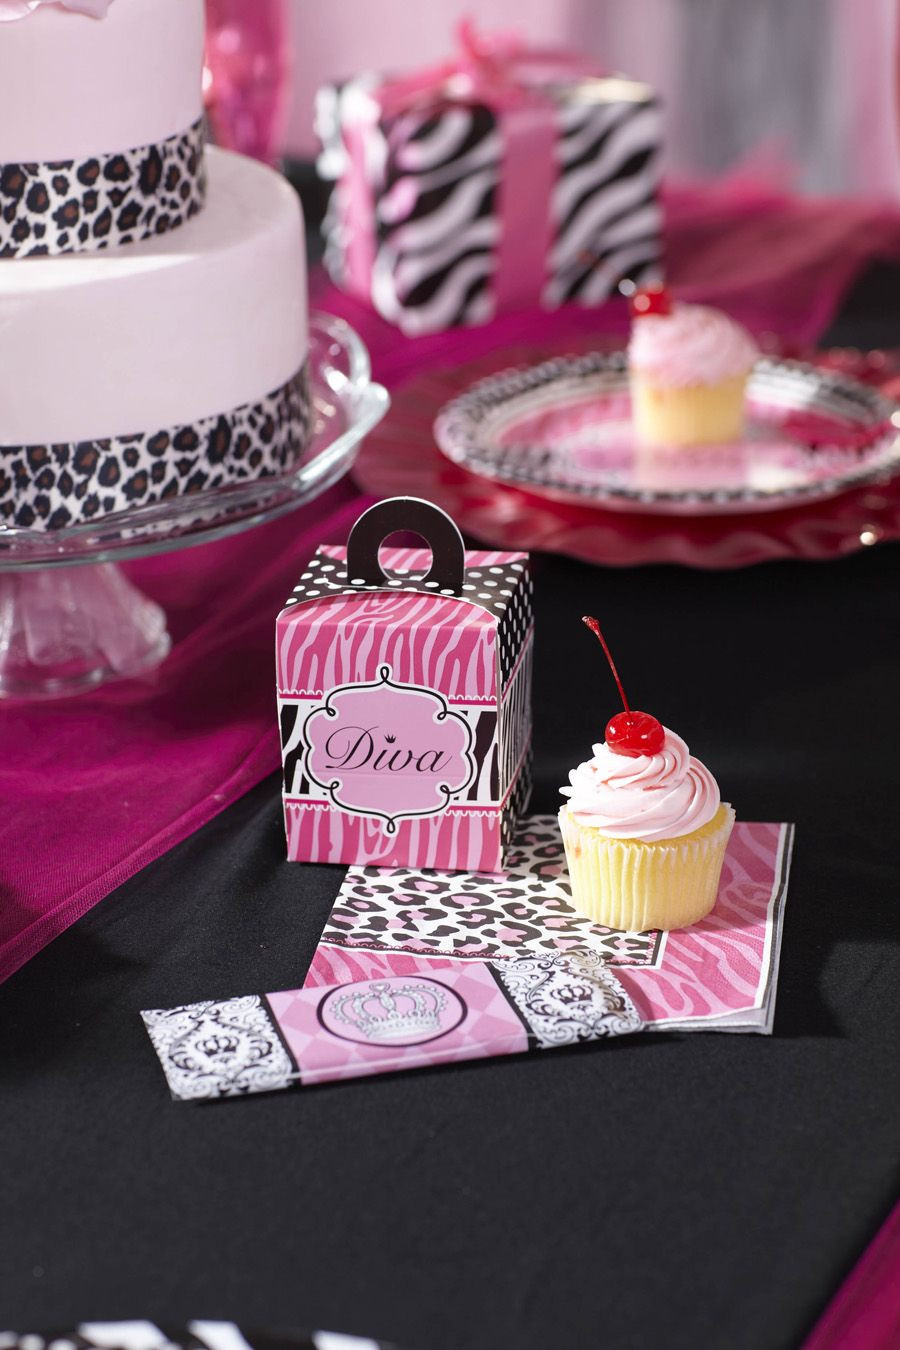 Zebra Print And Pink Birthday Party Ideas
 Cute Diva Zebra Print Party Supplies Party Girls